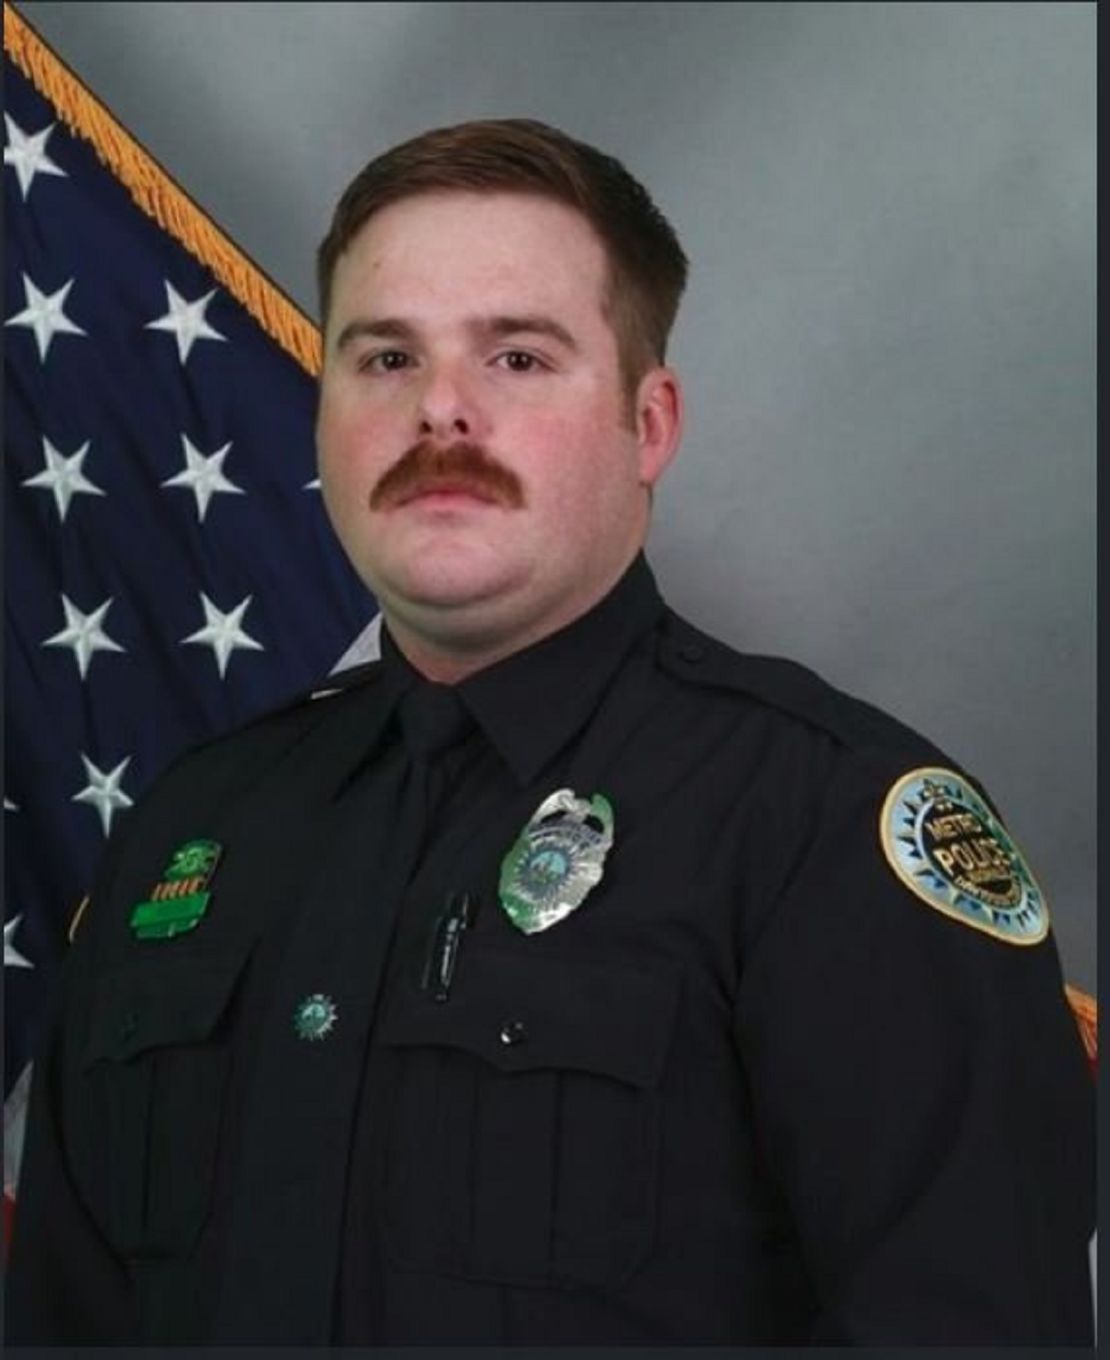 Nashville police officer John Anderson died at the scene. The 17-year-old suspect is in custody.